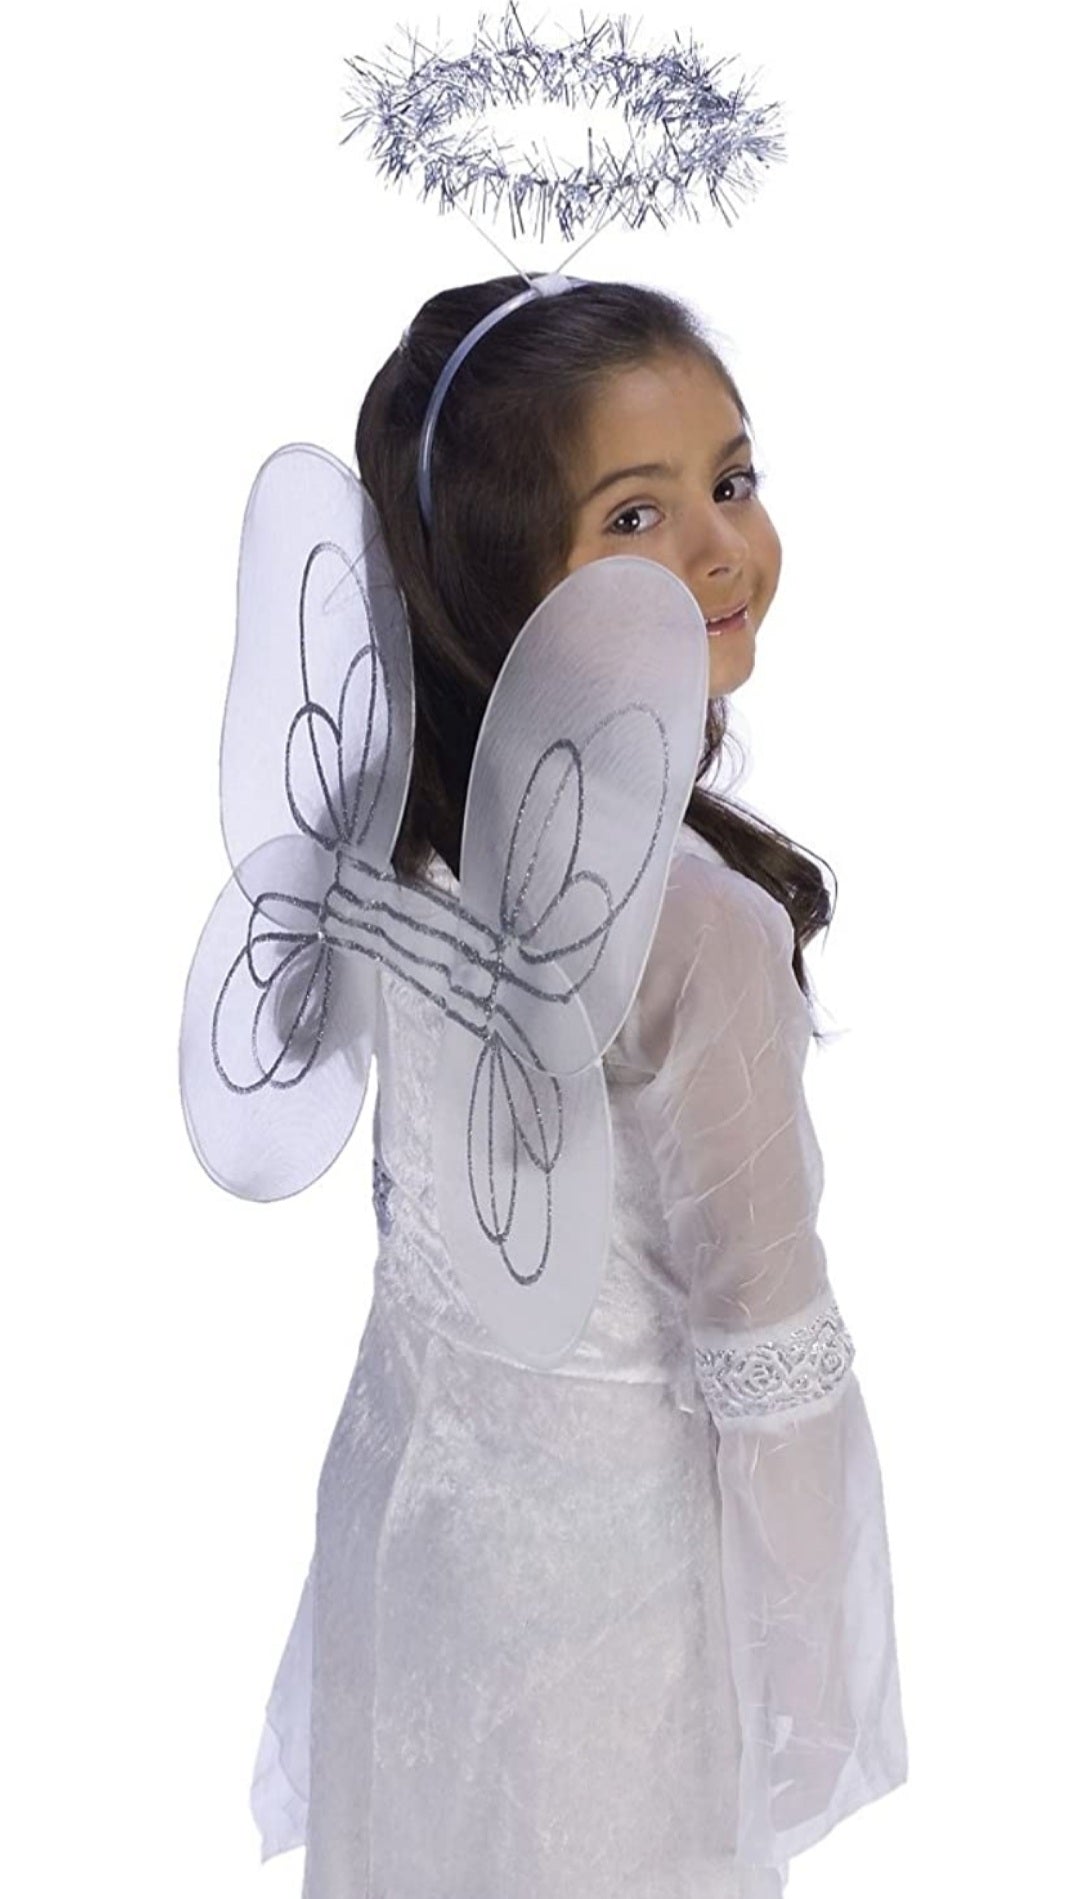 Angel Kit - Wings and Halo - White/Silver - Costume Accessories - Child Size